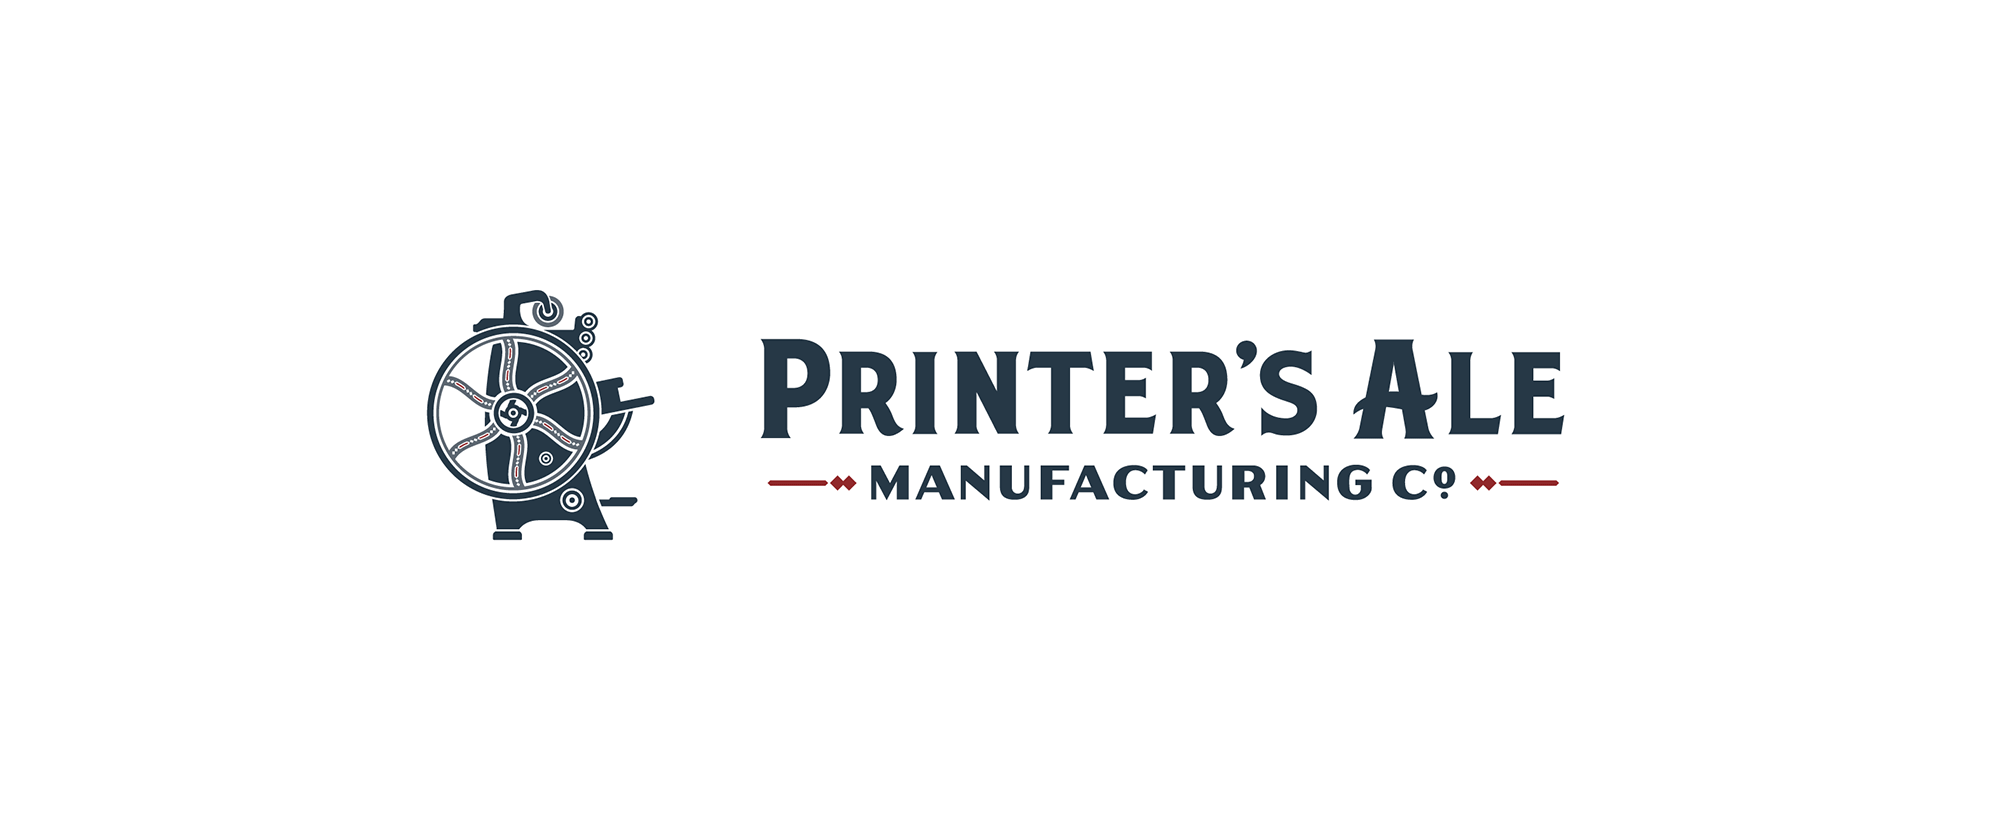 New Logo and Packaging for Printer’s Ale Manufacturing Co. by CODO